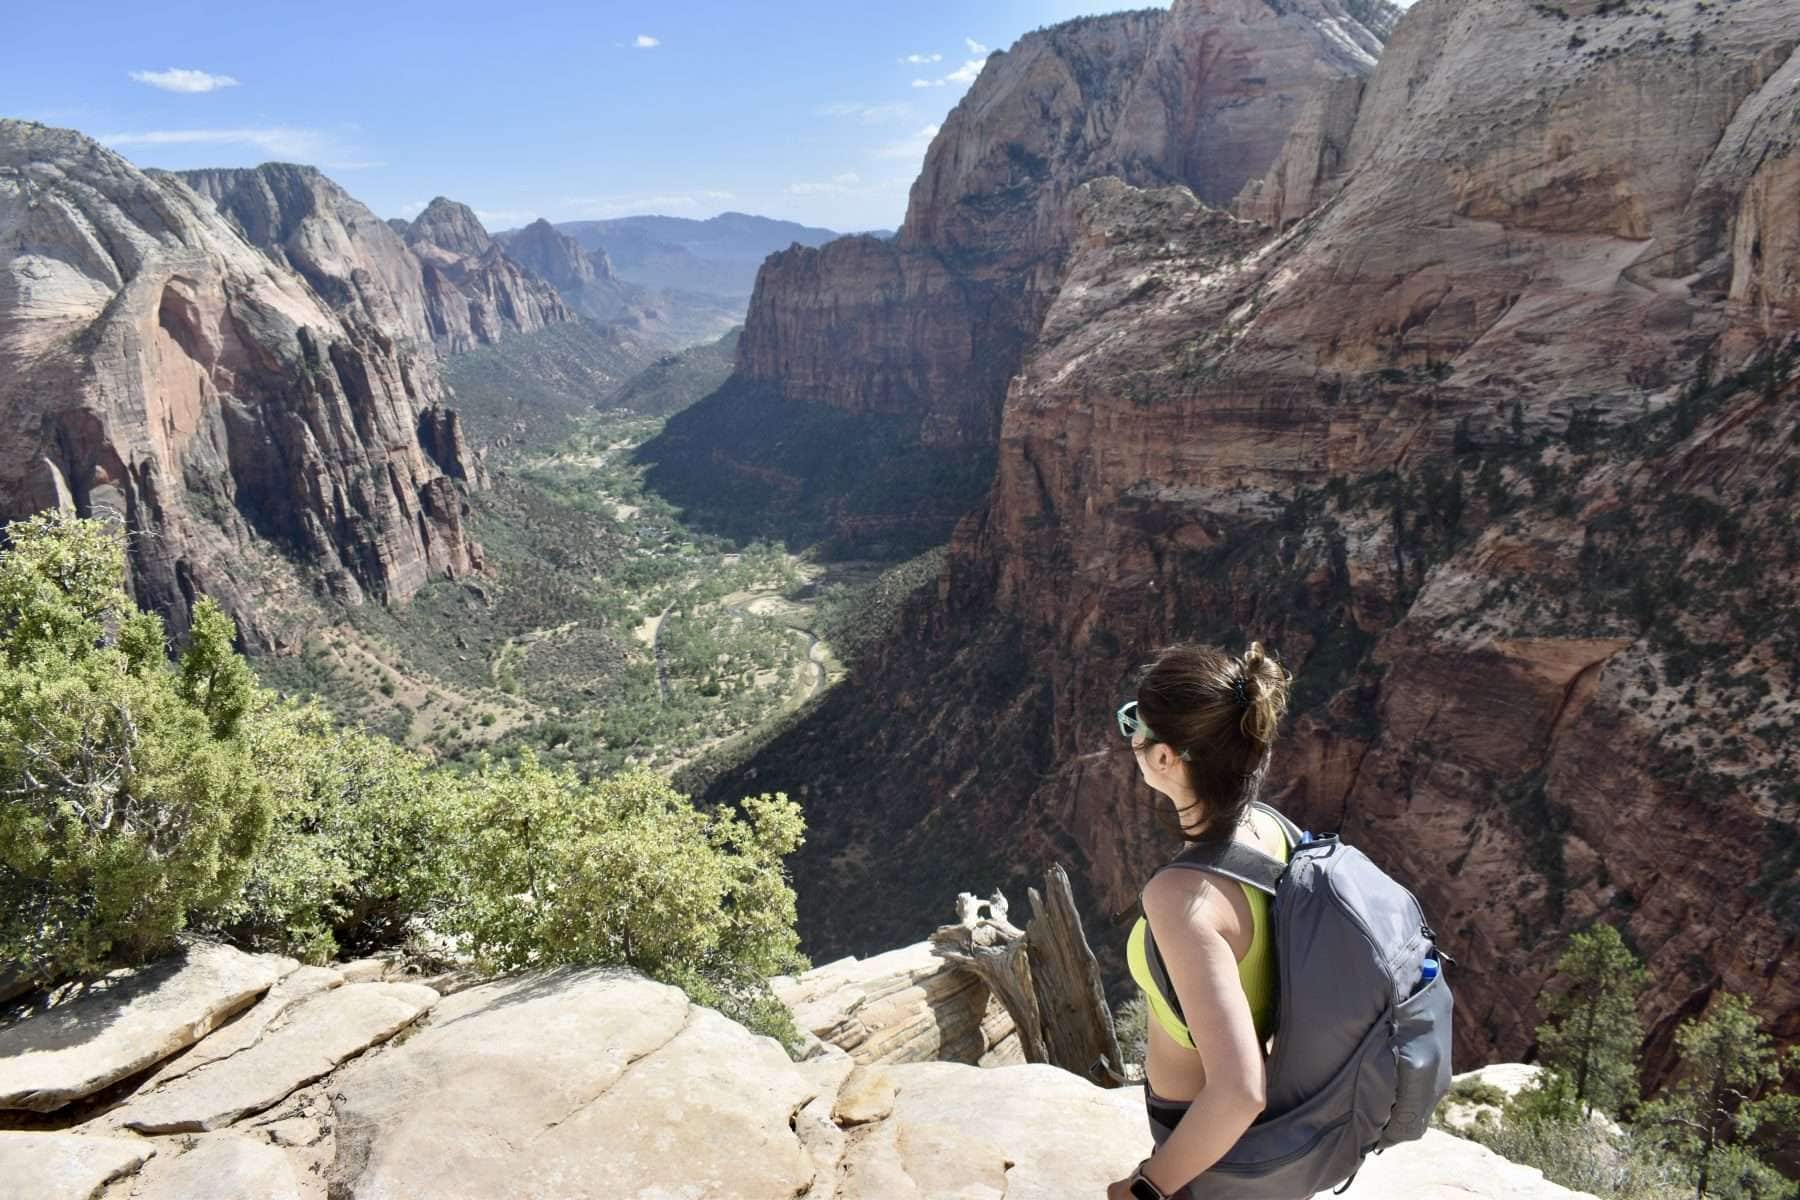 11 Tips for Safely Hiking Alone as a Woman